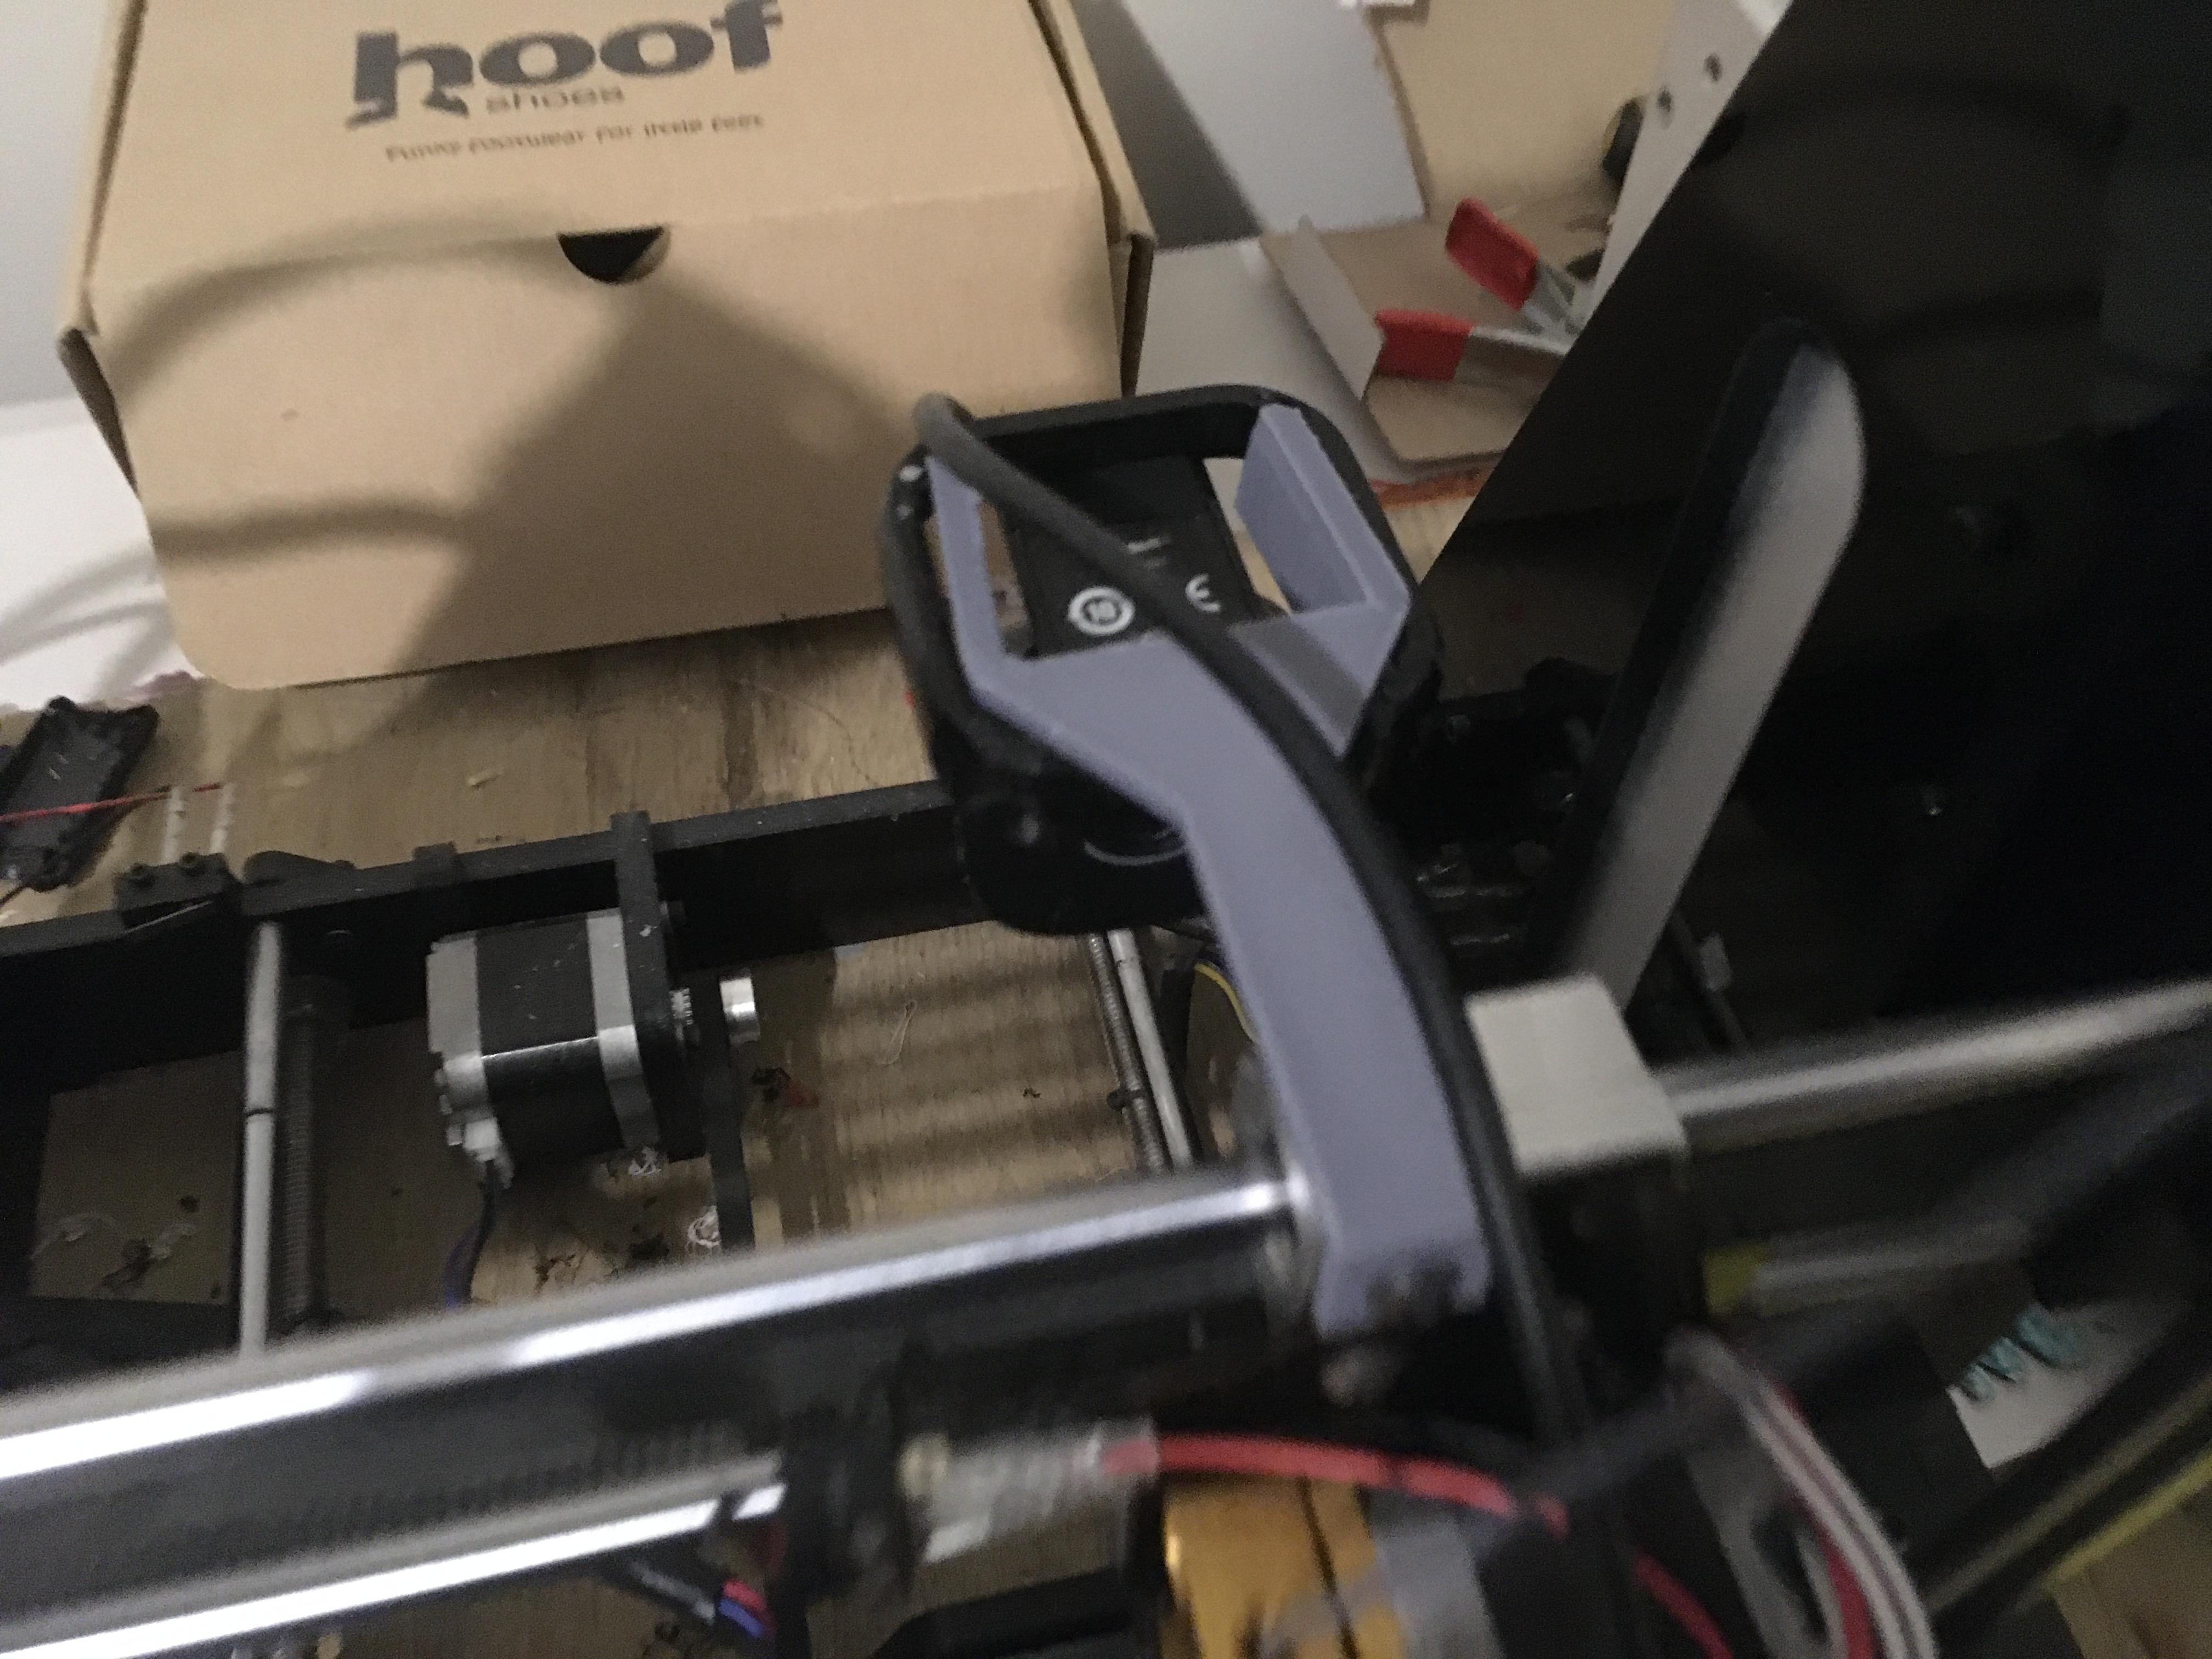 Web cam Mount for 3D printer to monitor your print.